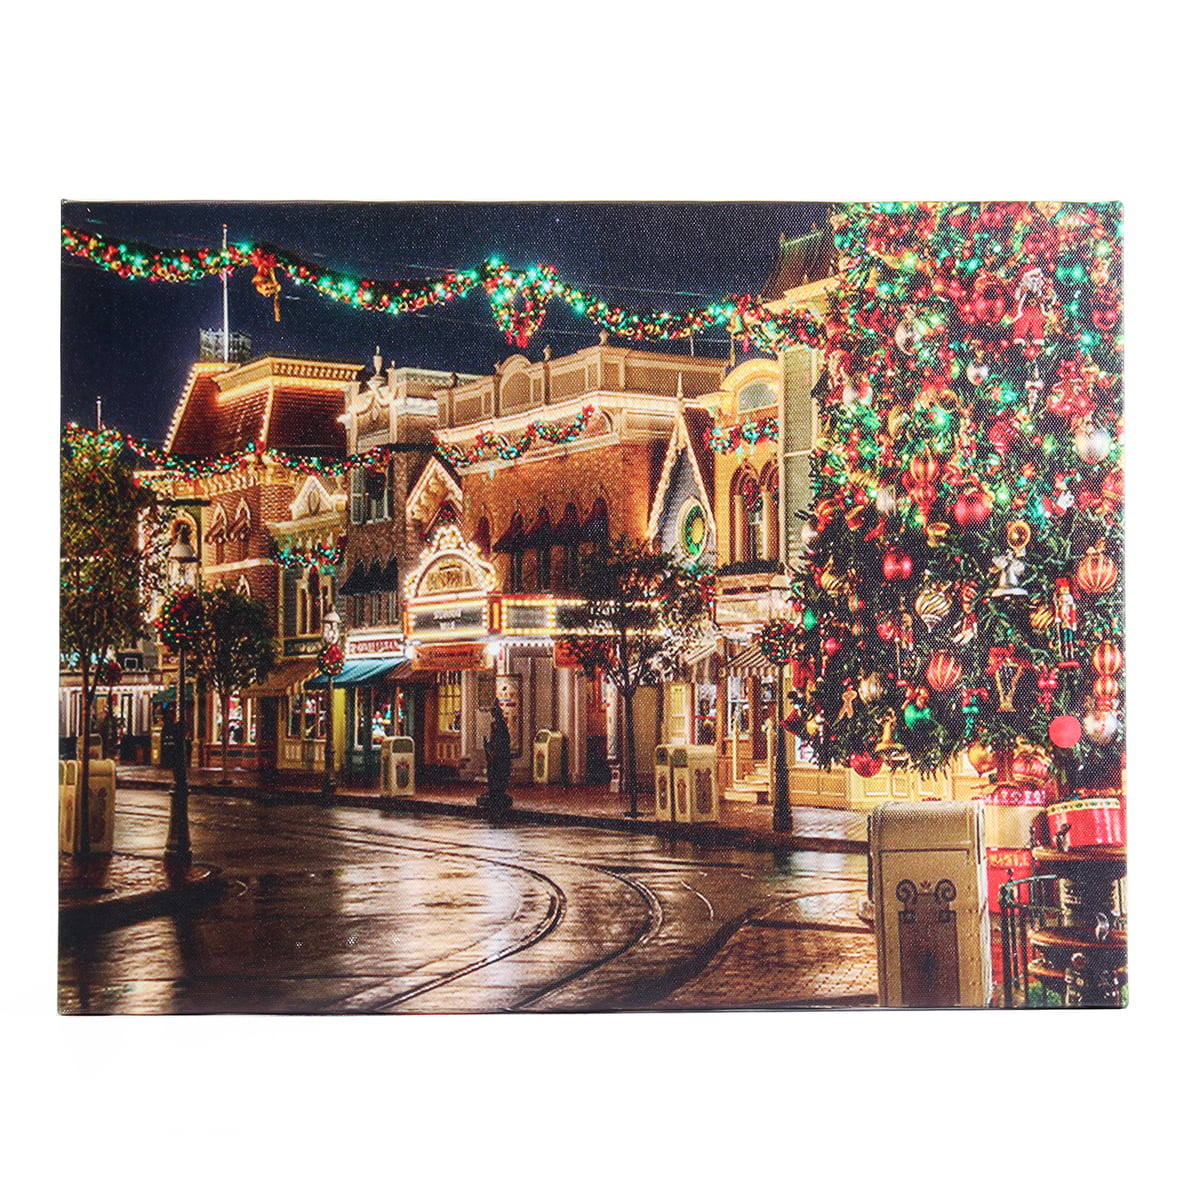 Easyinsmile Pretty Scenery Wall Pictures Paintings with LED Light Battery Powered Holiday Christmas Decorations 12 x 16